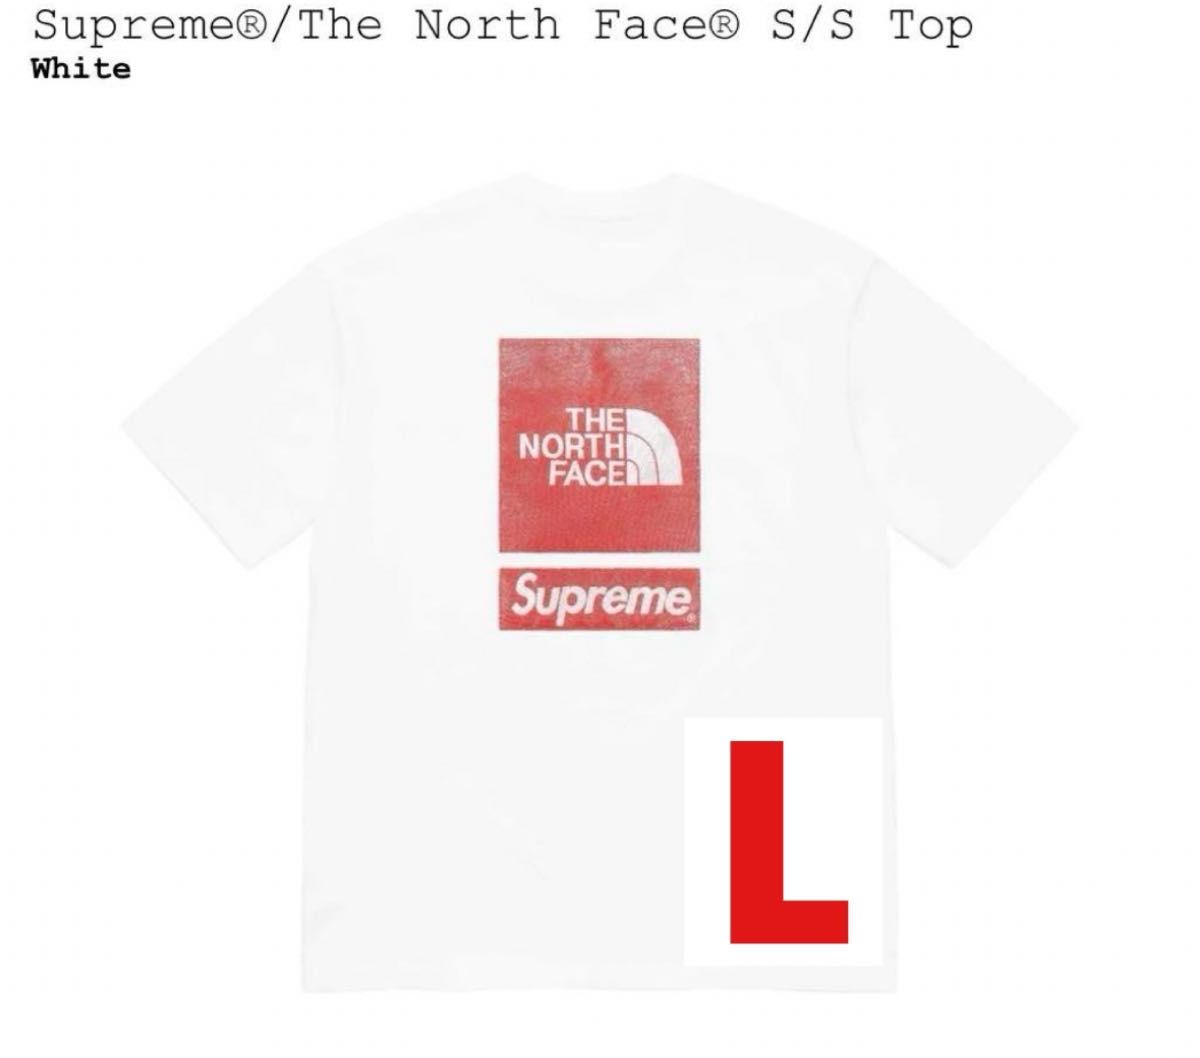 Supreme/The North Face S/S Top